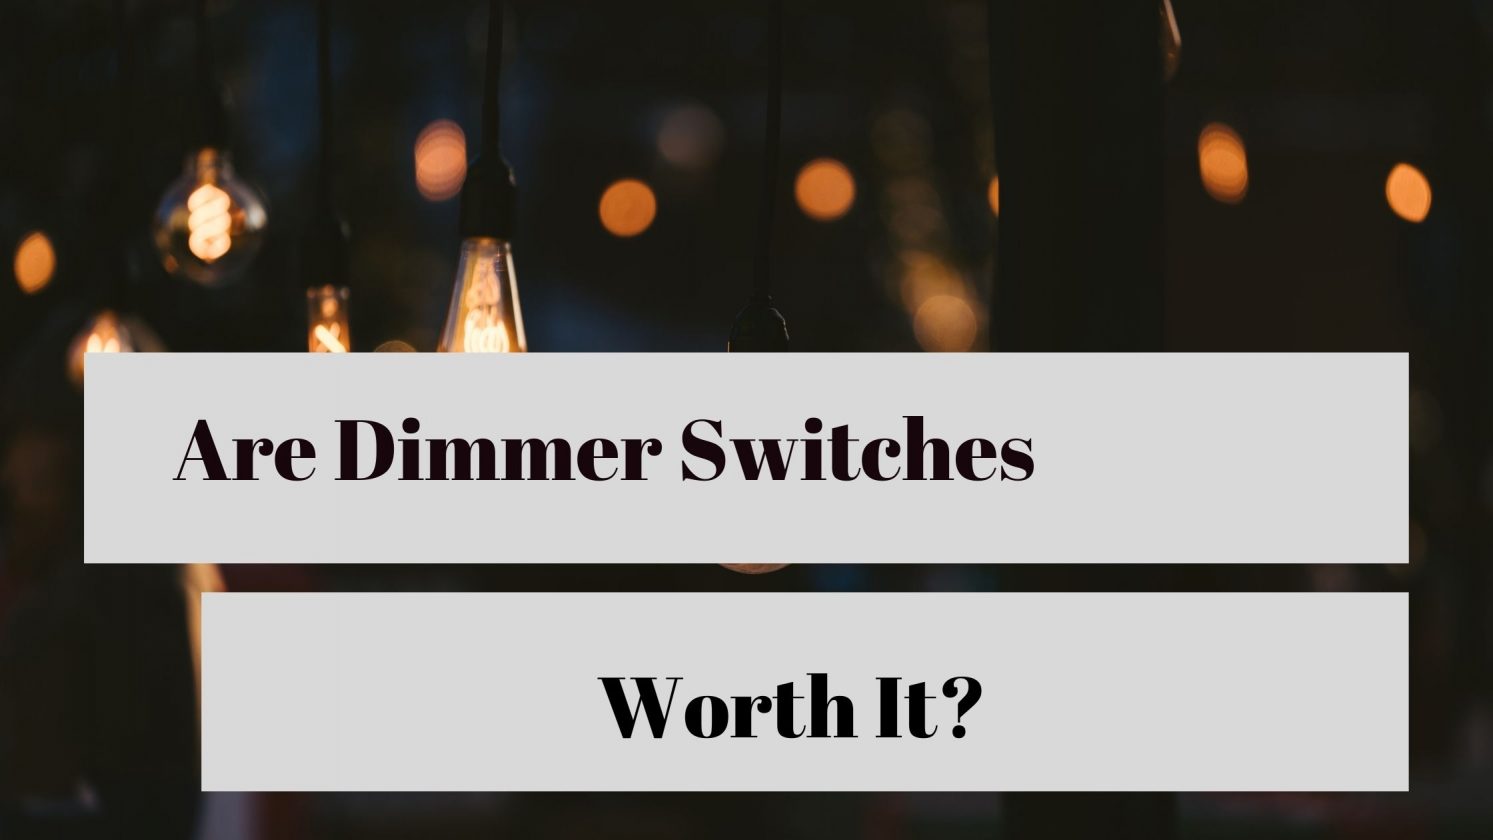 Are Dimmer Switches Worth It?